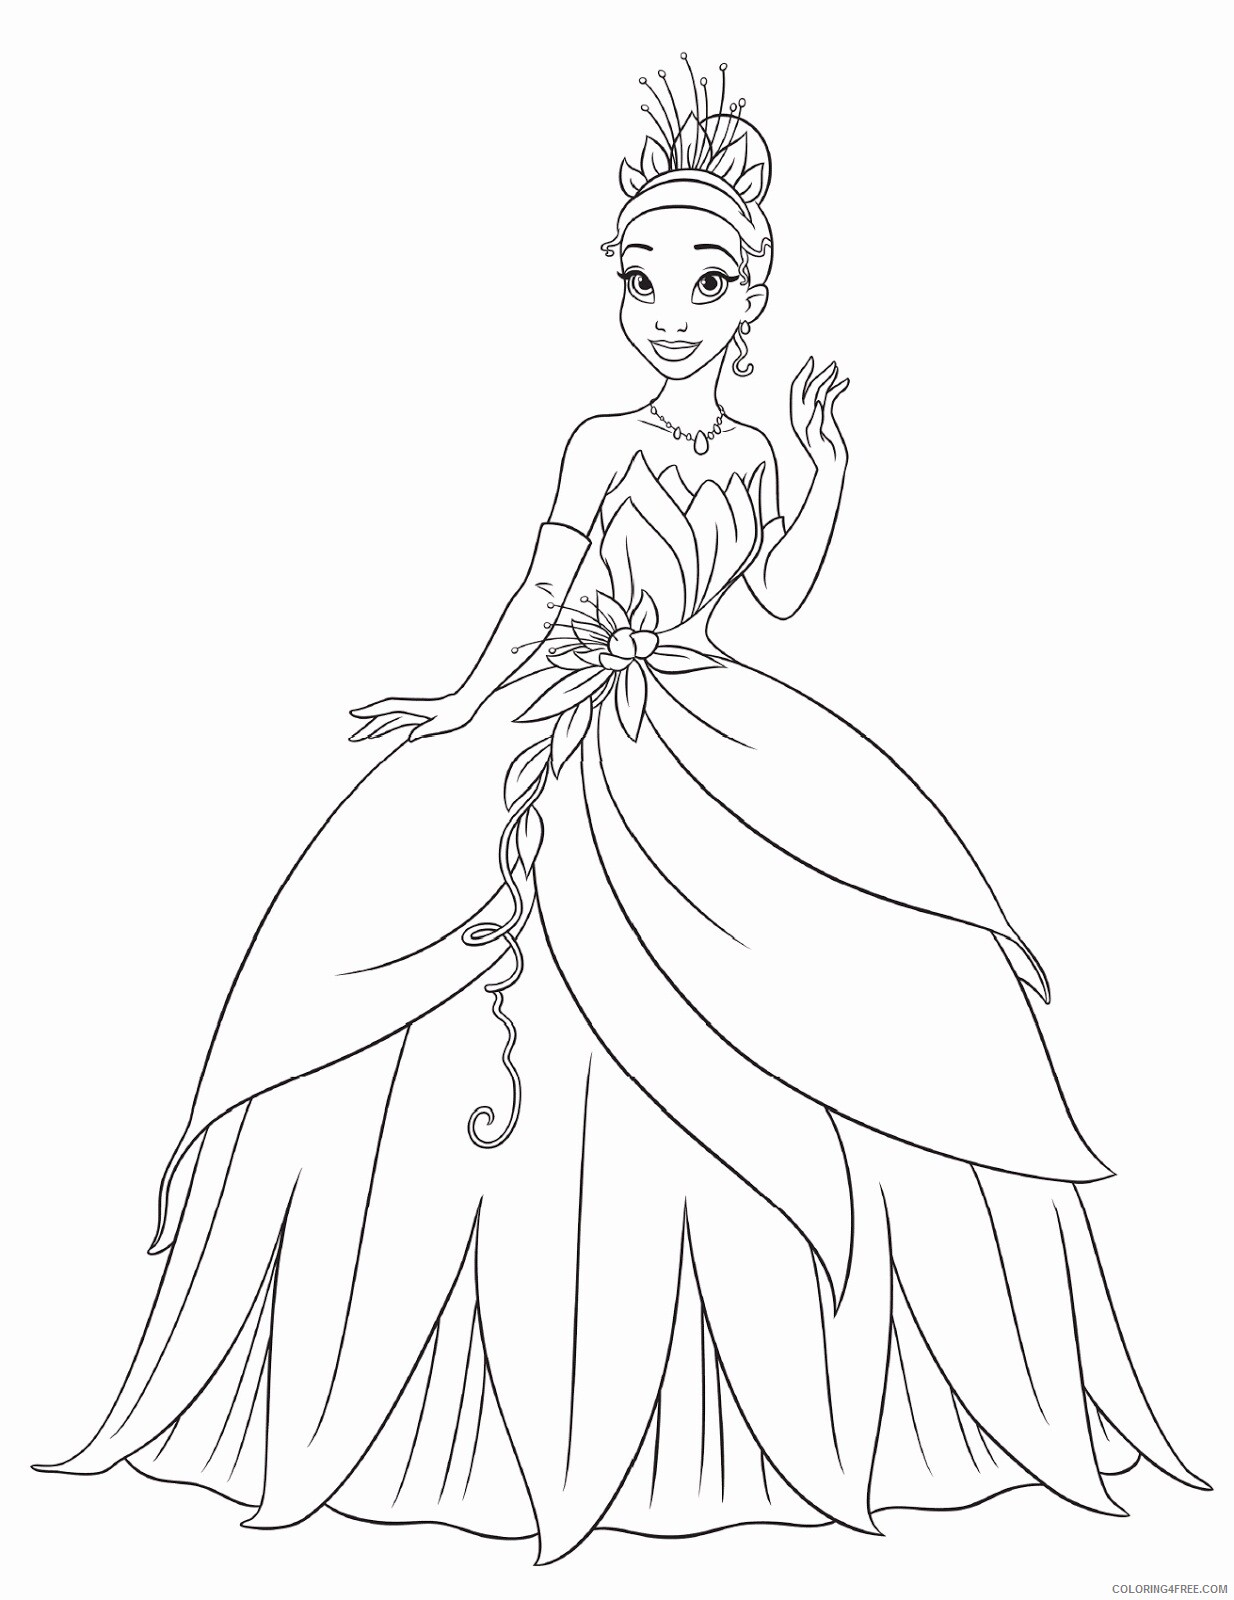 Princess Coloring Pages for Girls Princess to Printable 2021 1121 Coloring4free